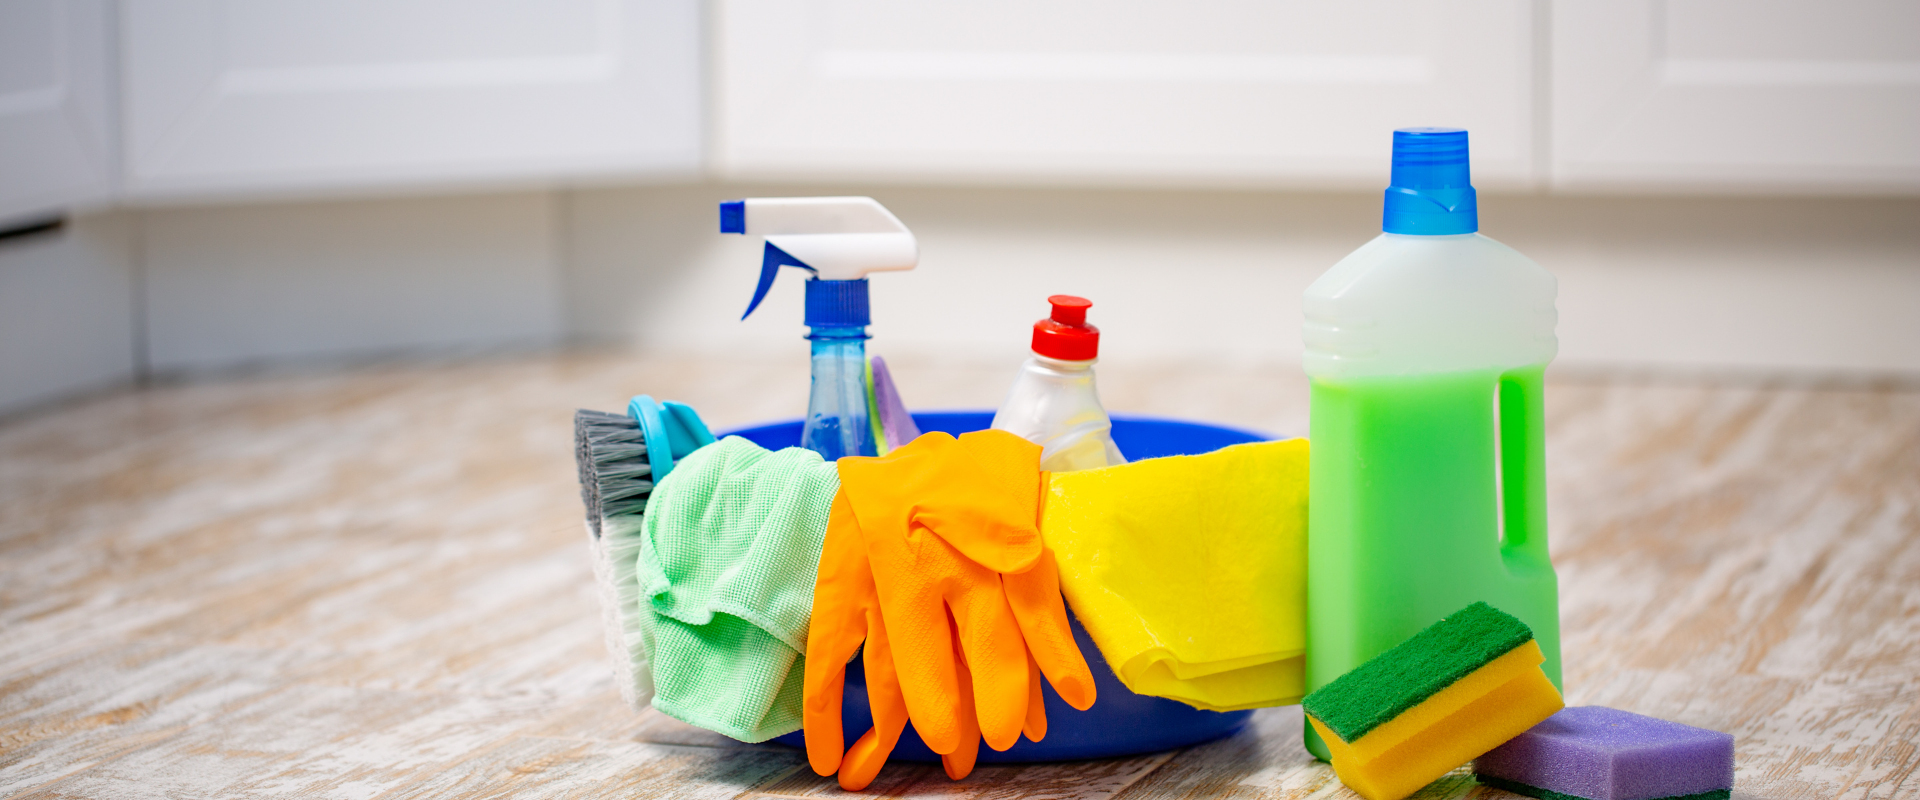 10 of the Best Tips for Dental Office Spring Cleaning